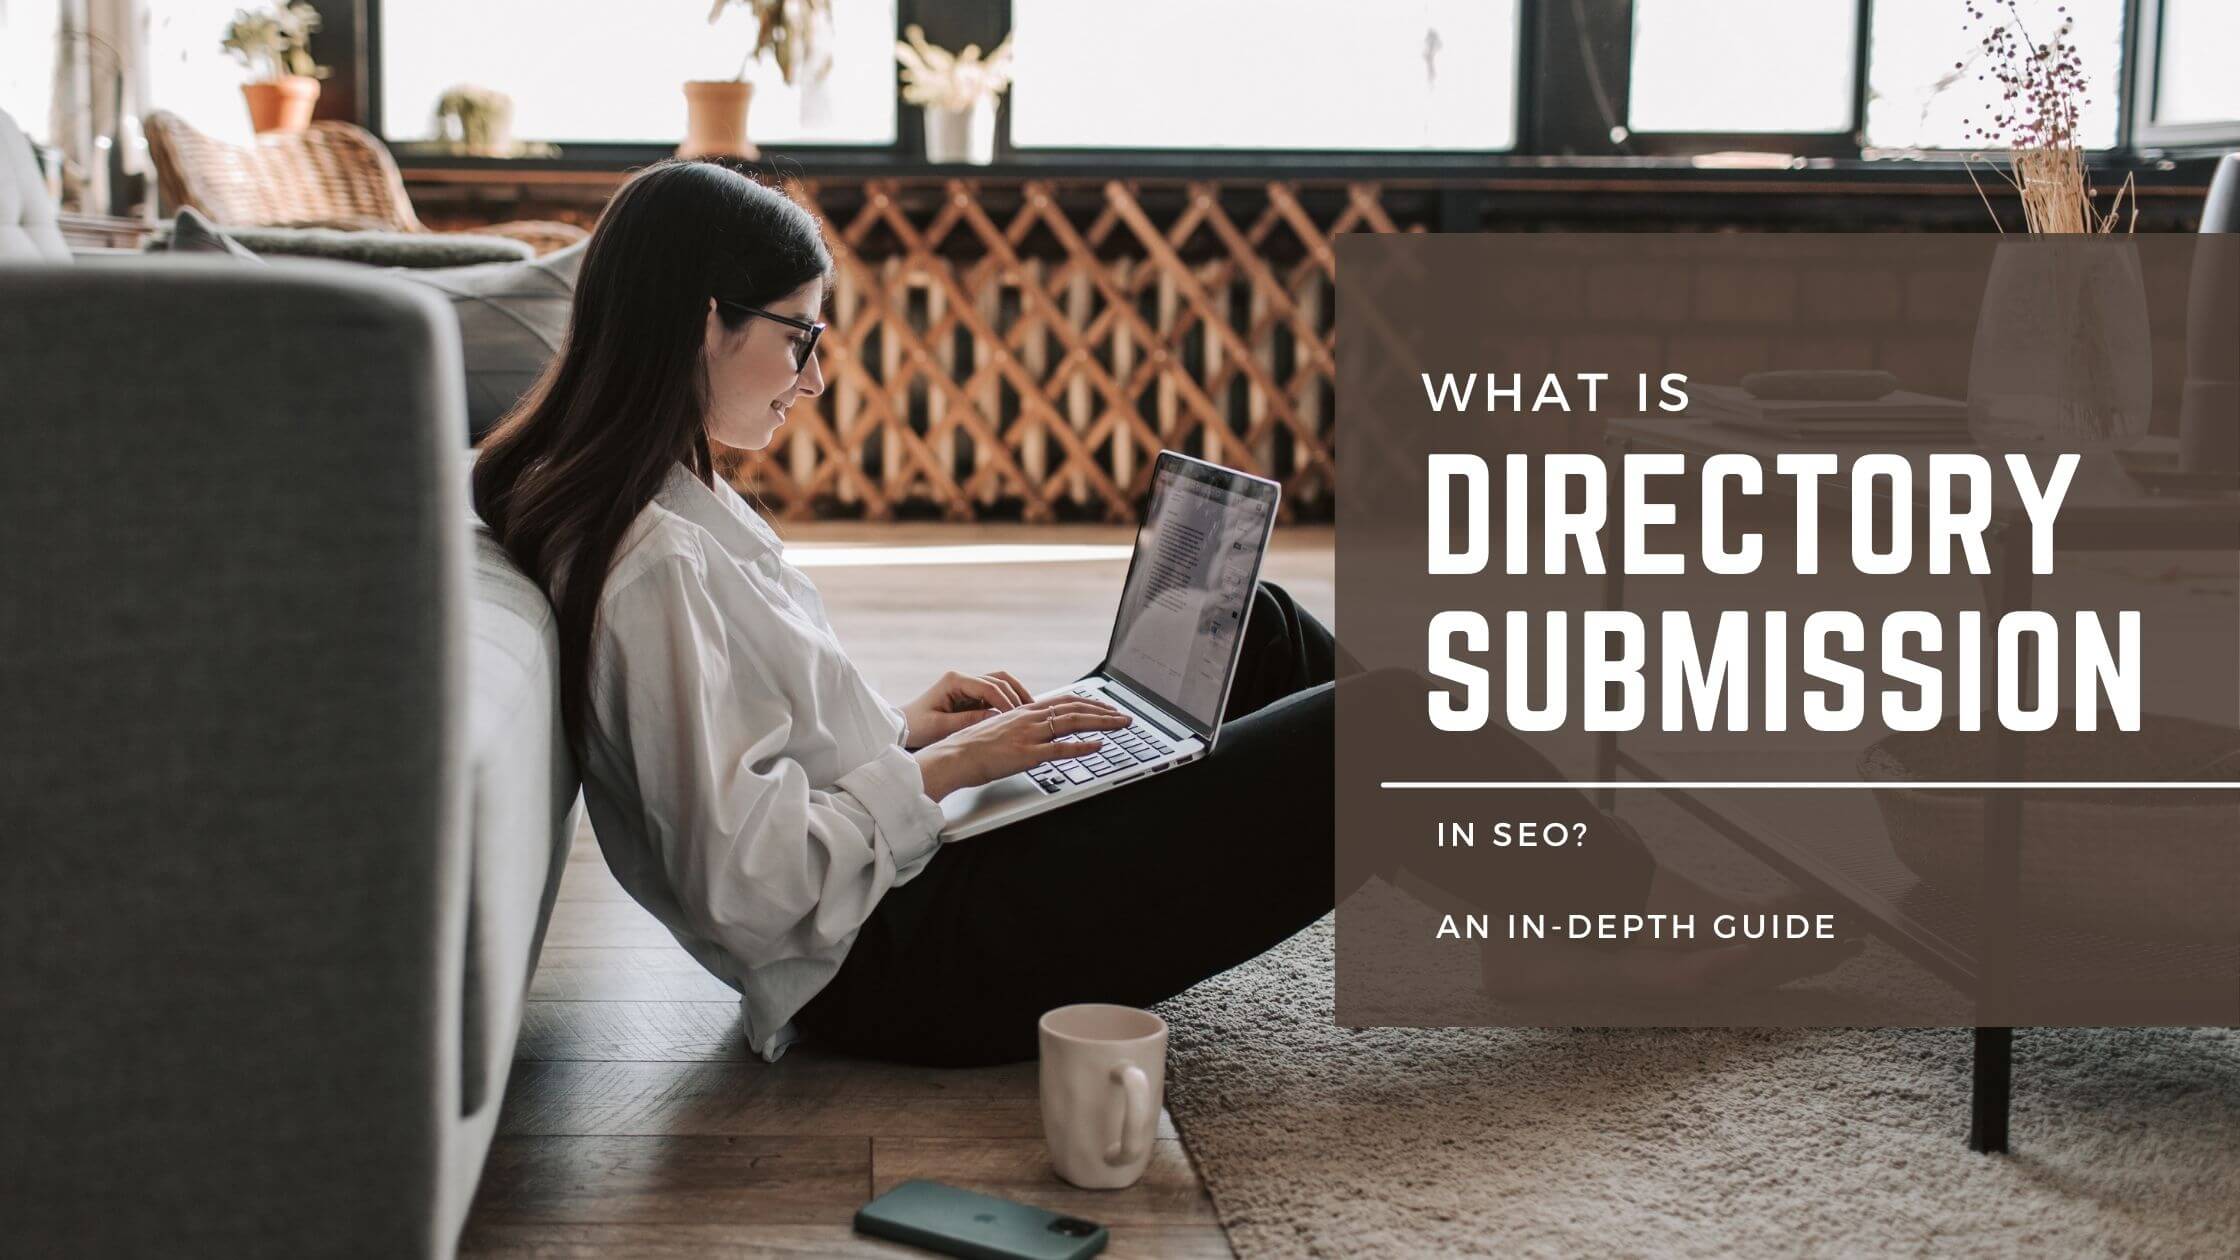 What is directory submission in SEO